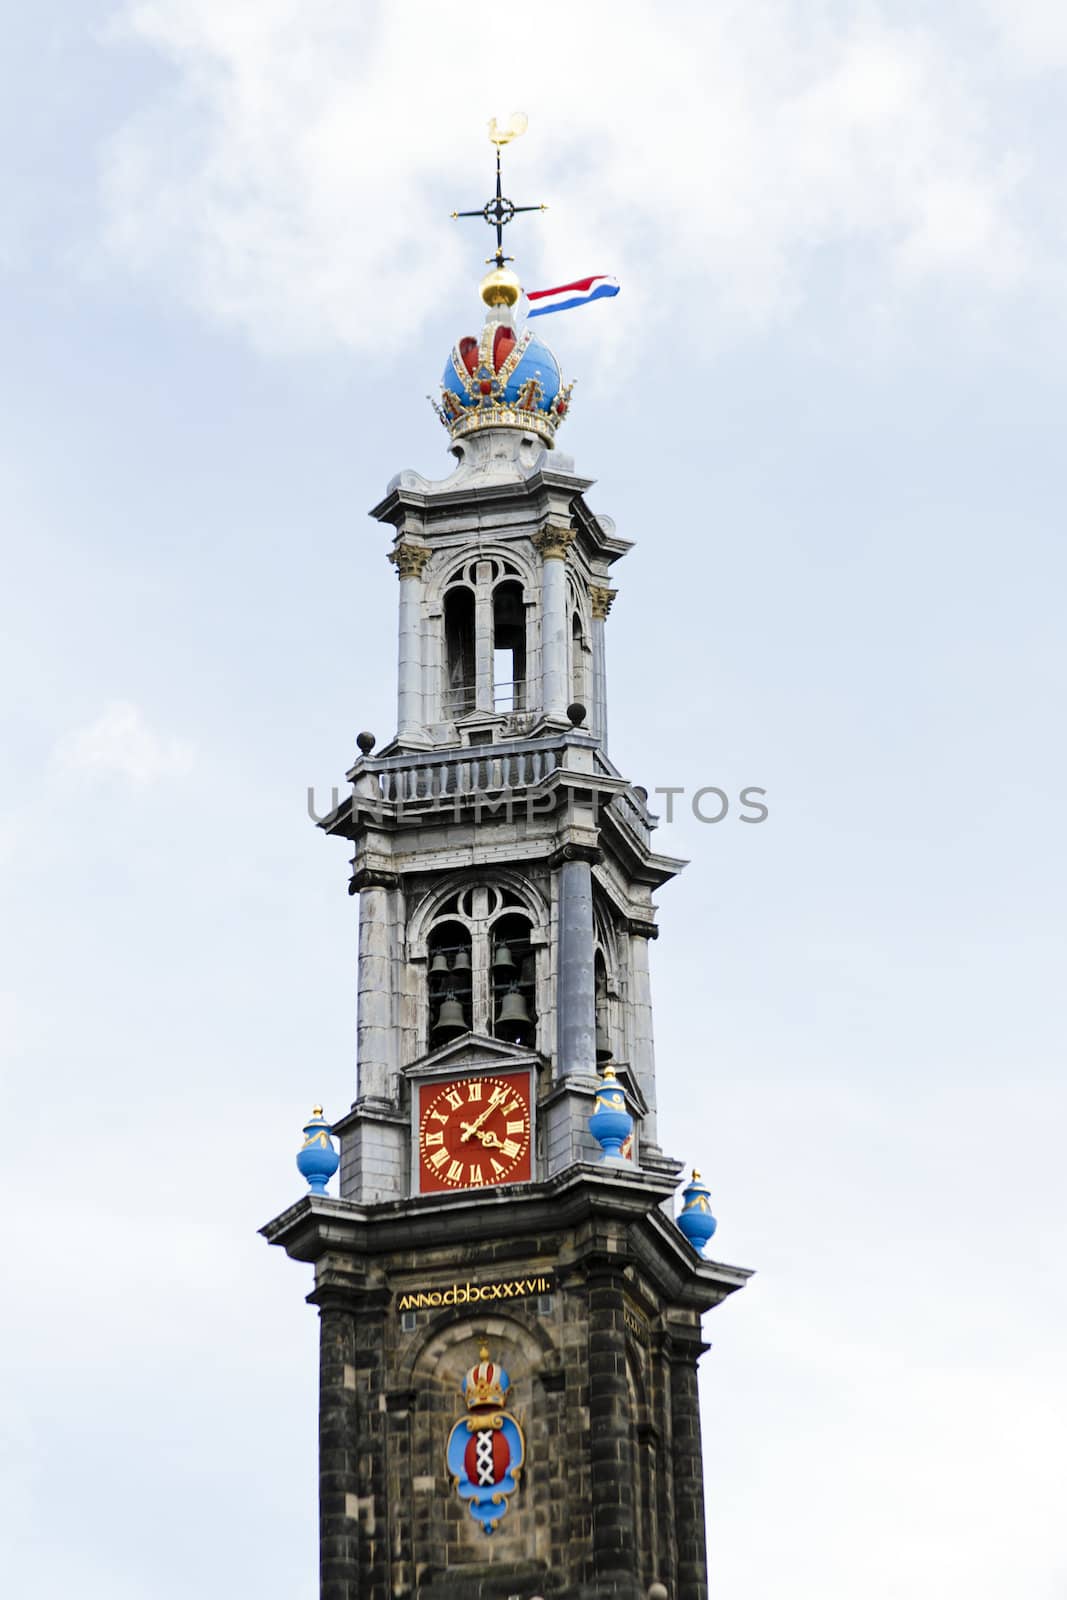 Tower from the Westerkerk in Amsterdam the Netherlands